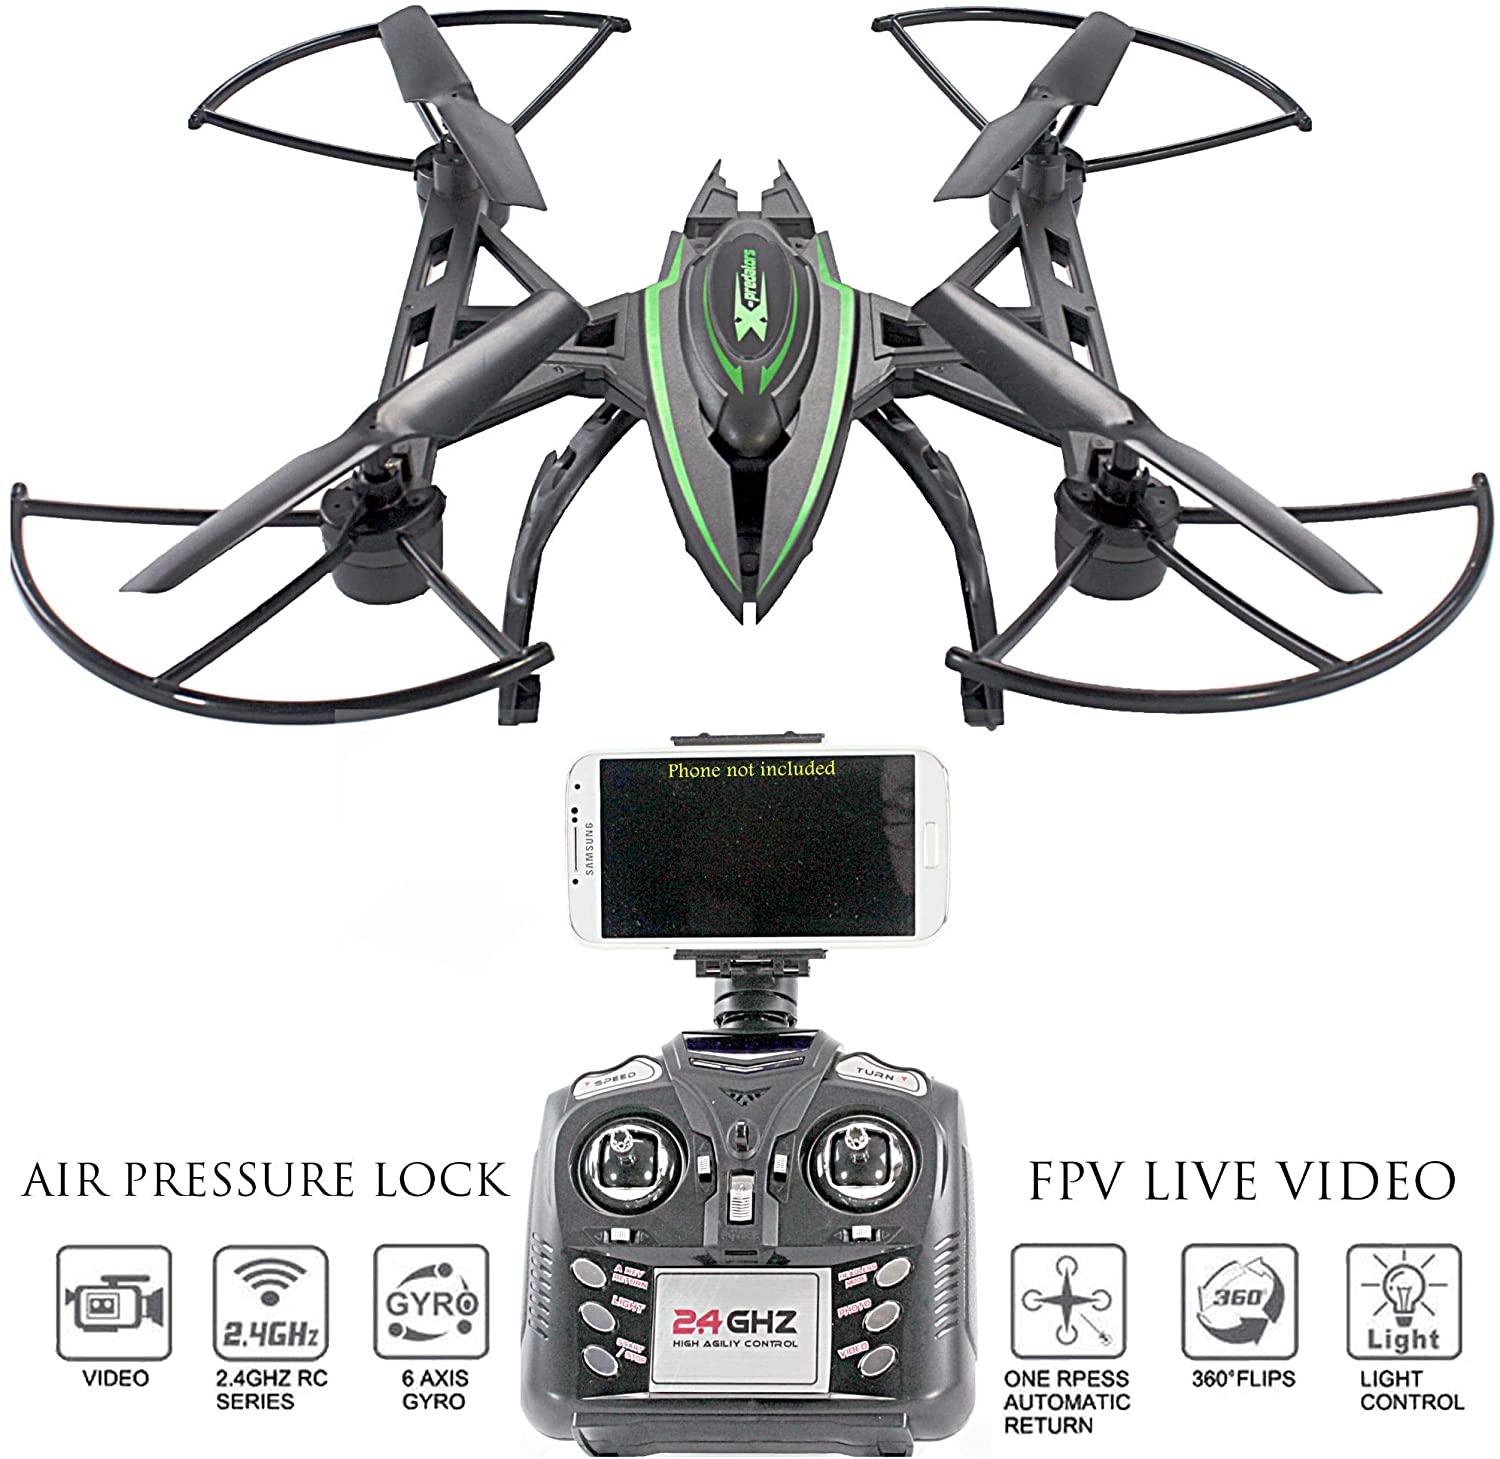 Drone with Camera Quadcopter RC Drones Helicopter - Beautiful HD Cam, Air Pressure Sensor Altitude Lock, Easy Control Headless Mode, Return Home Key, 6 Axis Gyroscope | Decor Gifts and More